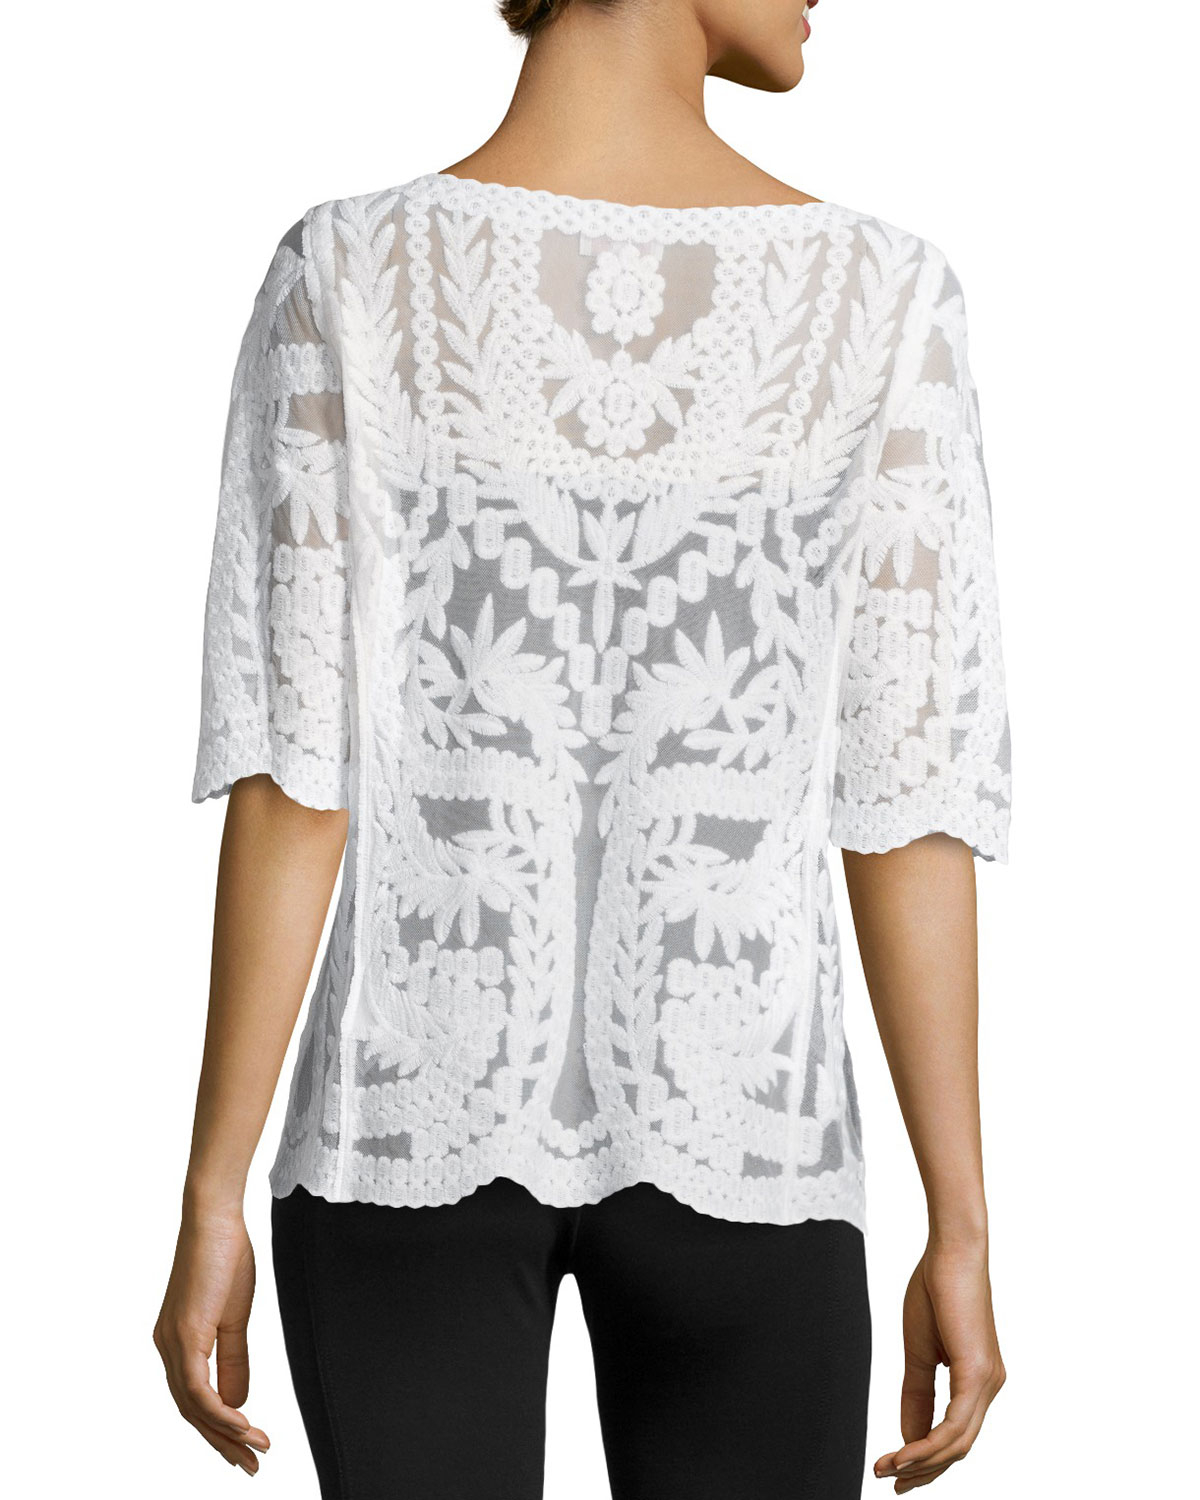 Laundry by shelli segal Mesh & Lace Boat-Neck Top in White (OPTIC WHIT ...